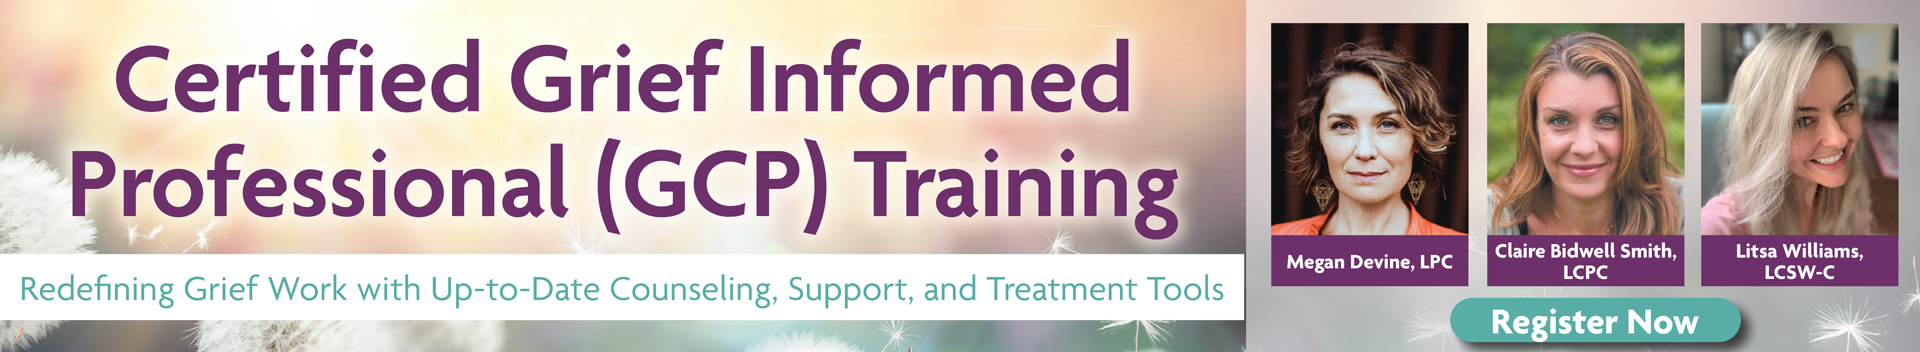 Certified Grief Informed Professional (GCP) Training